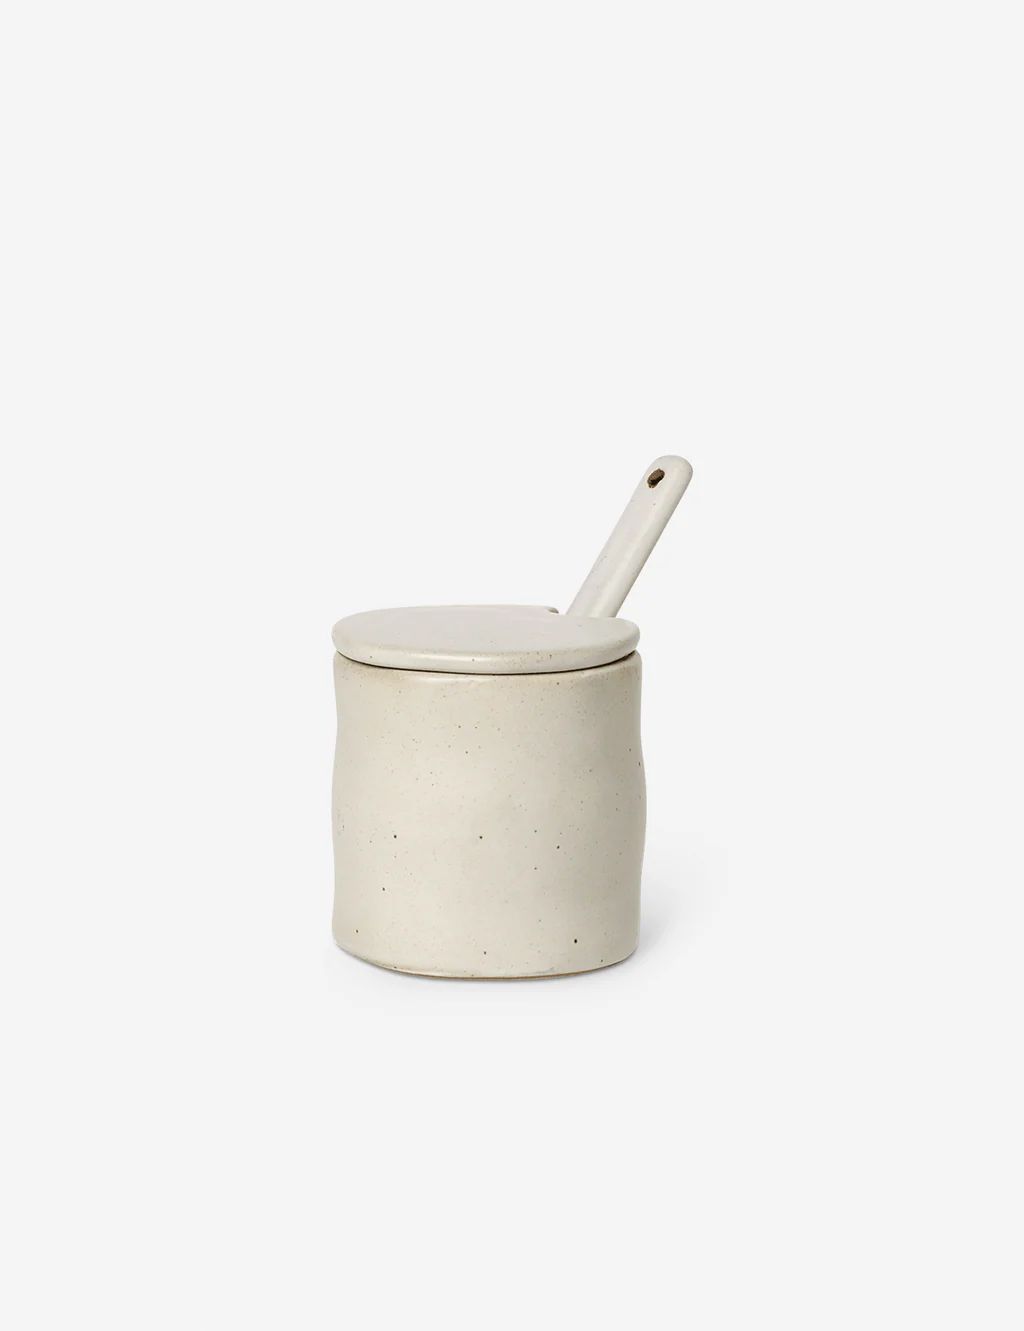 Flow Jar with Spoon by Ferm Living | Lulu and Georgia 